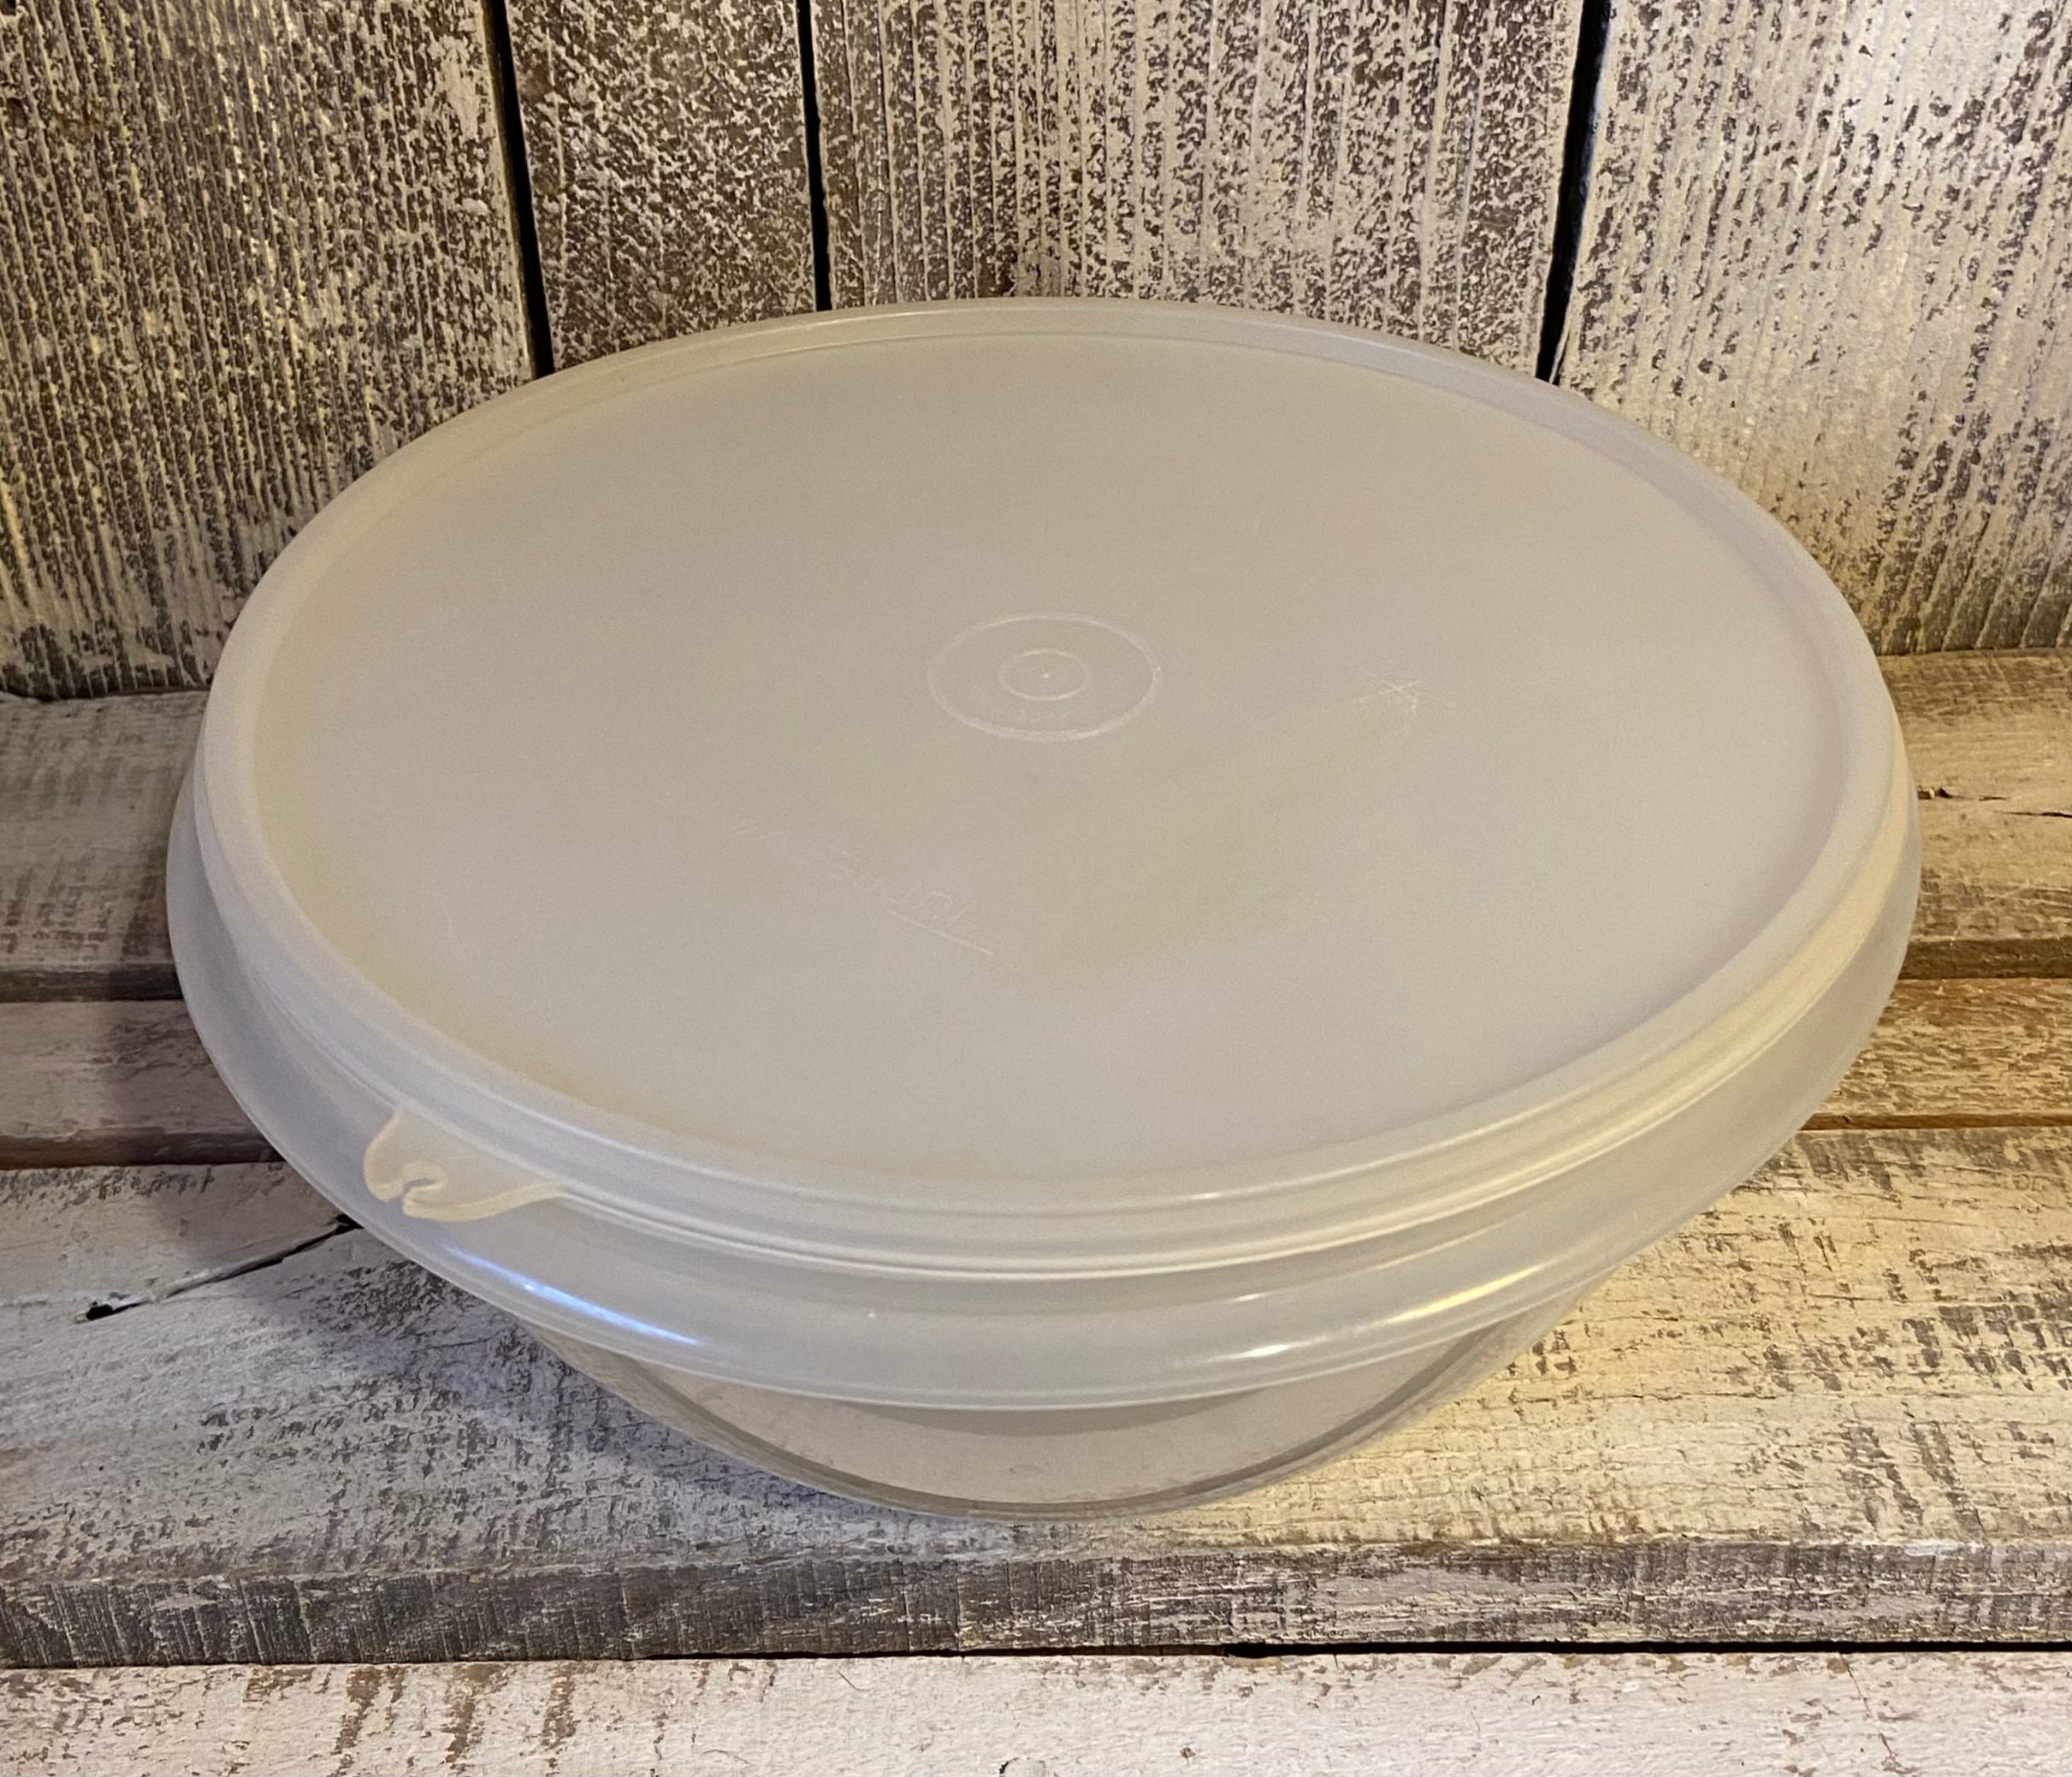 Vintage Tupperware Bowl / Replacement Bowl / Replacement Lid